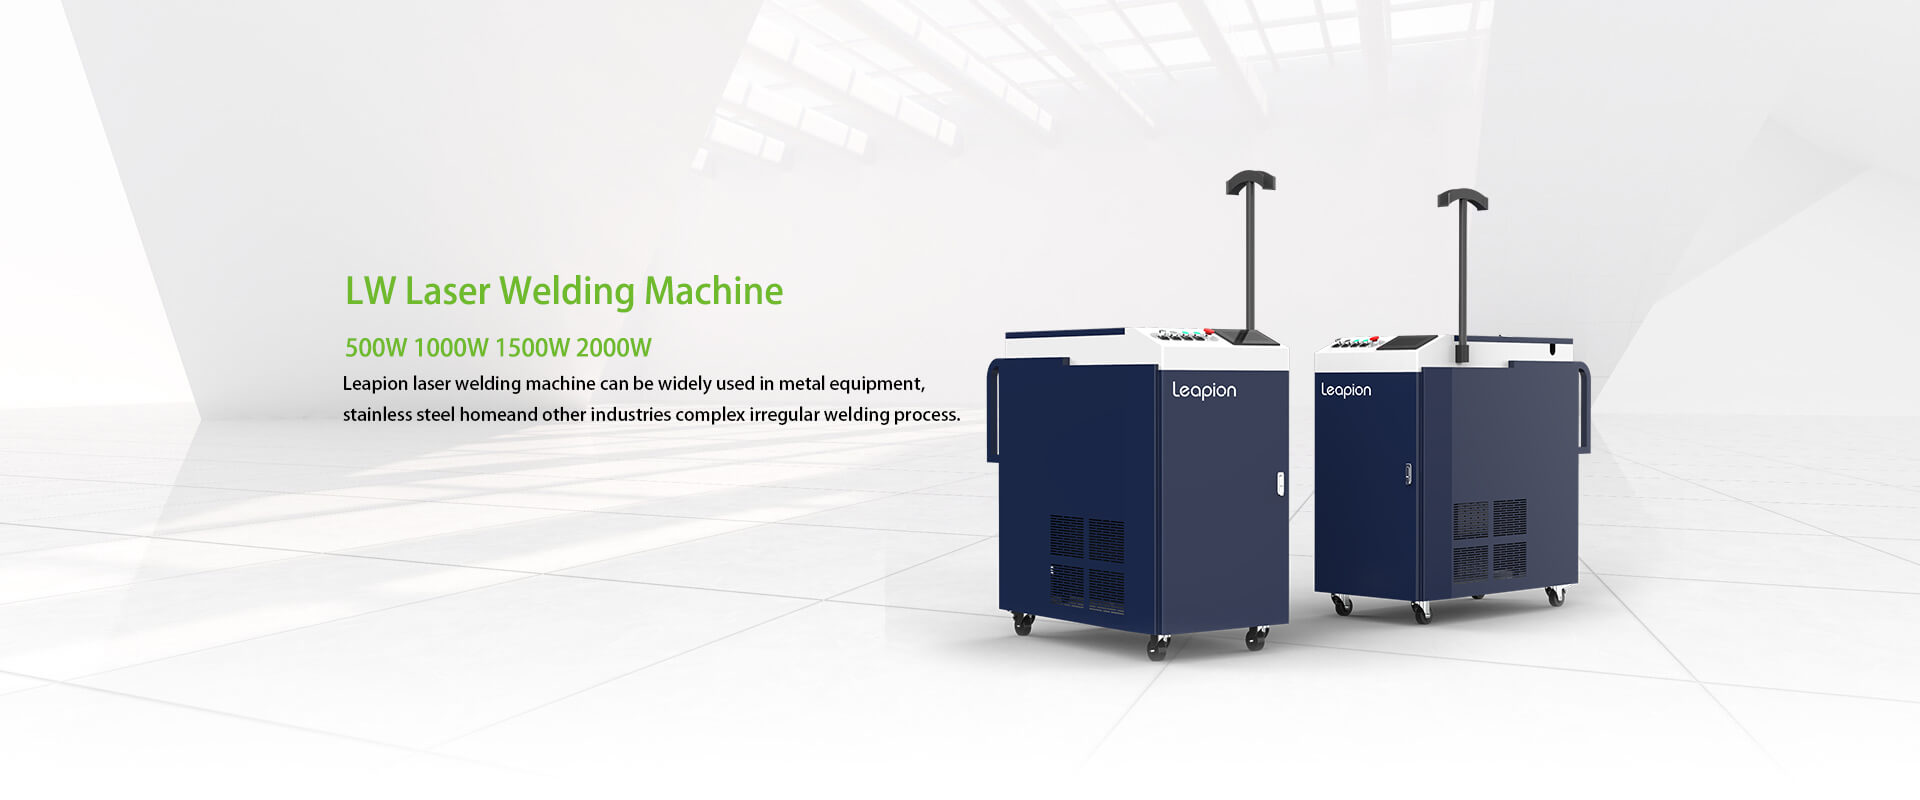 How about the application of laser welding machine in the medical equipment industry?